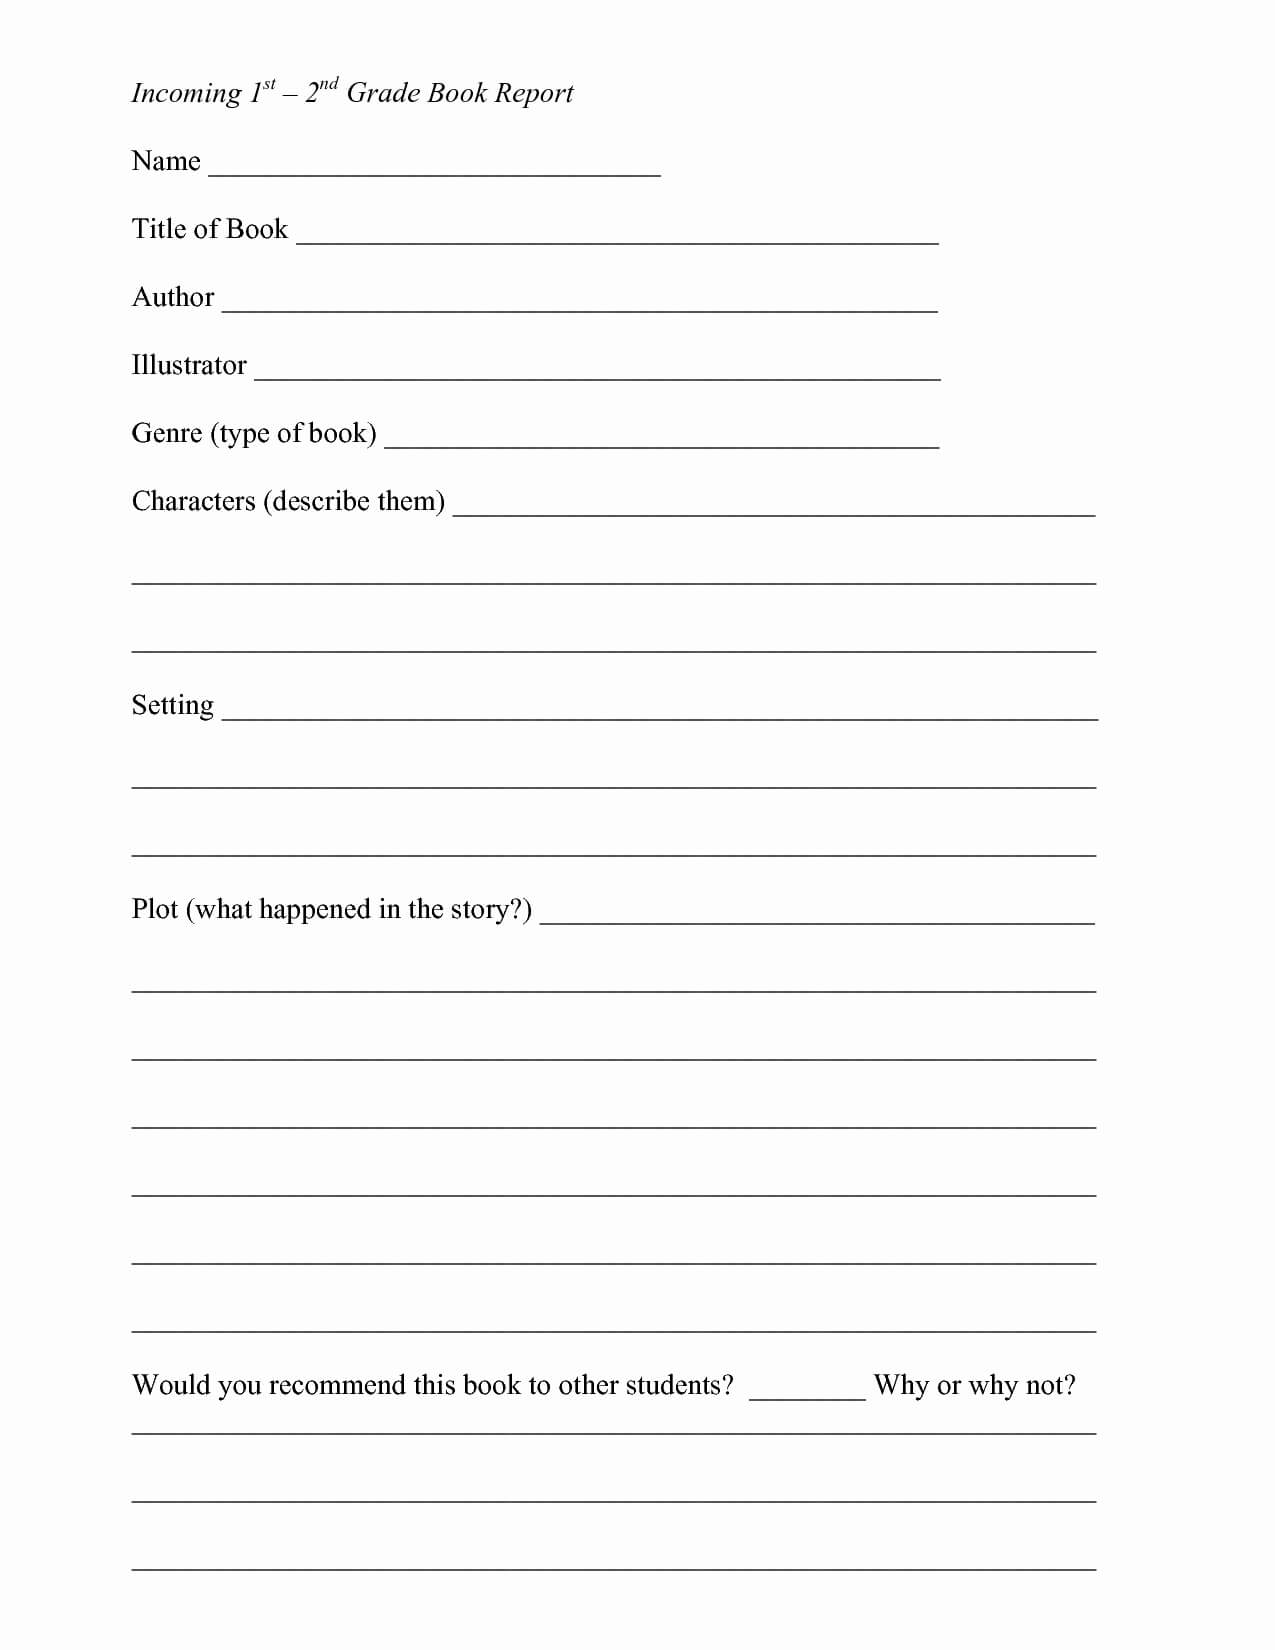 Fiction Book Report Template 6Th Grade For 7Th Graders Pdf Pertaining To 2Nd Grade Book Report Template